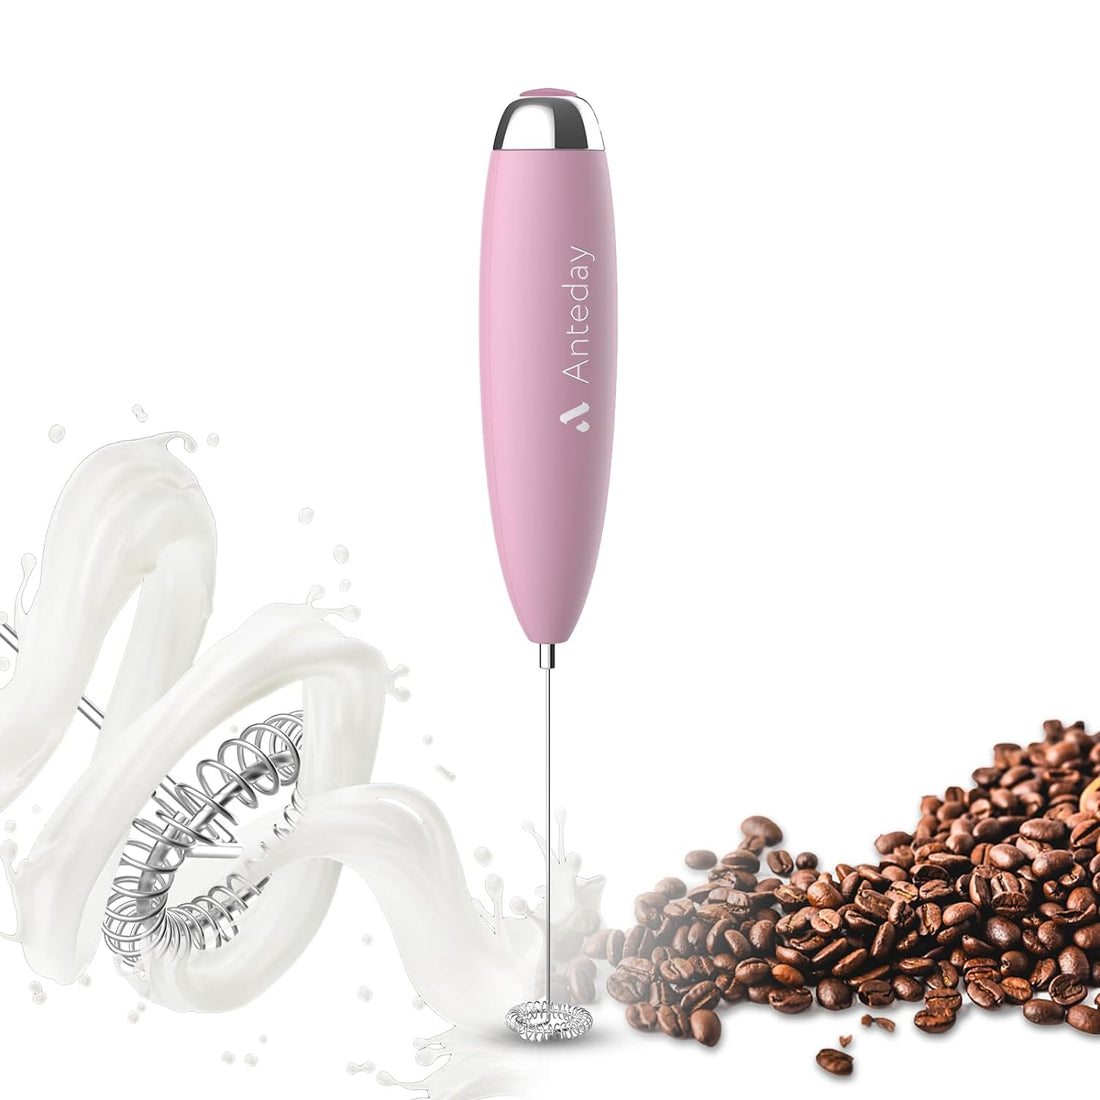 Frother for Coffee, Frother Handheld, Milk Frother, Upgraded Matcha Whisk Drink Mixer Electric Mini Whisk Hand Frother Mini Foamer Coffee Mixer for Lattes Cappuccino Frappe Matcha Hot Chocolate, Pink